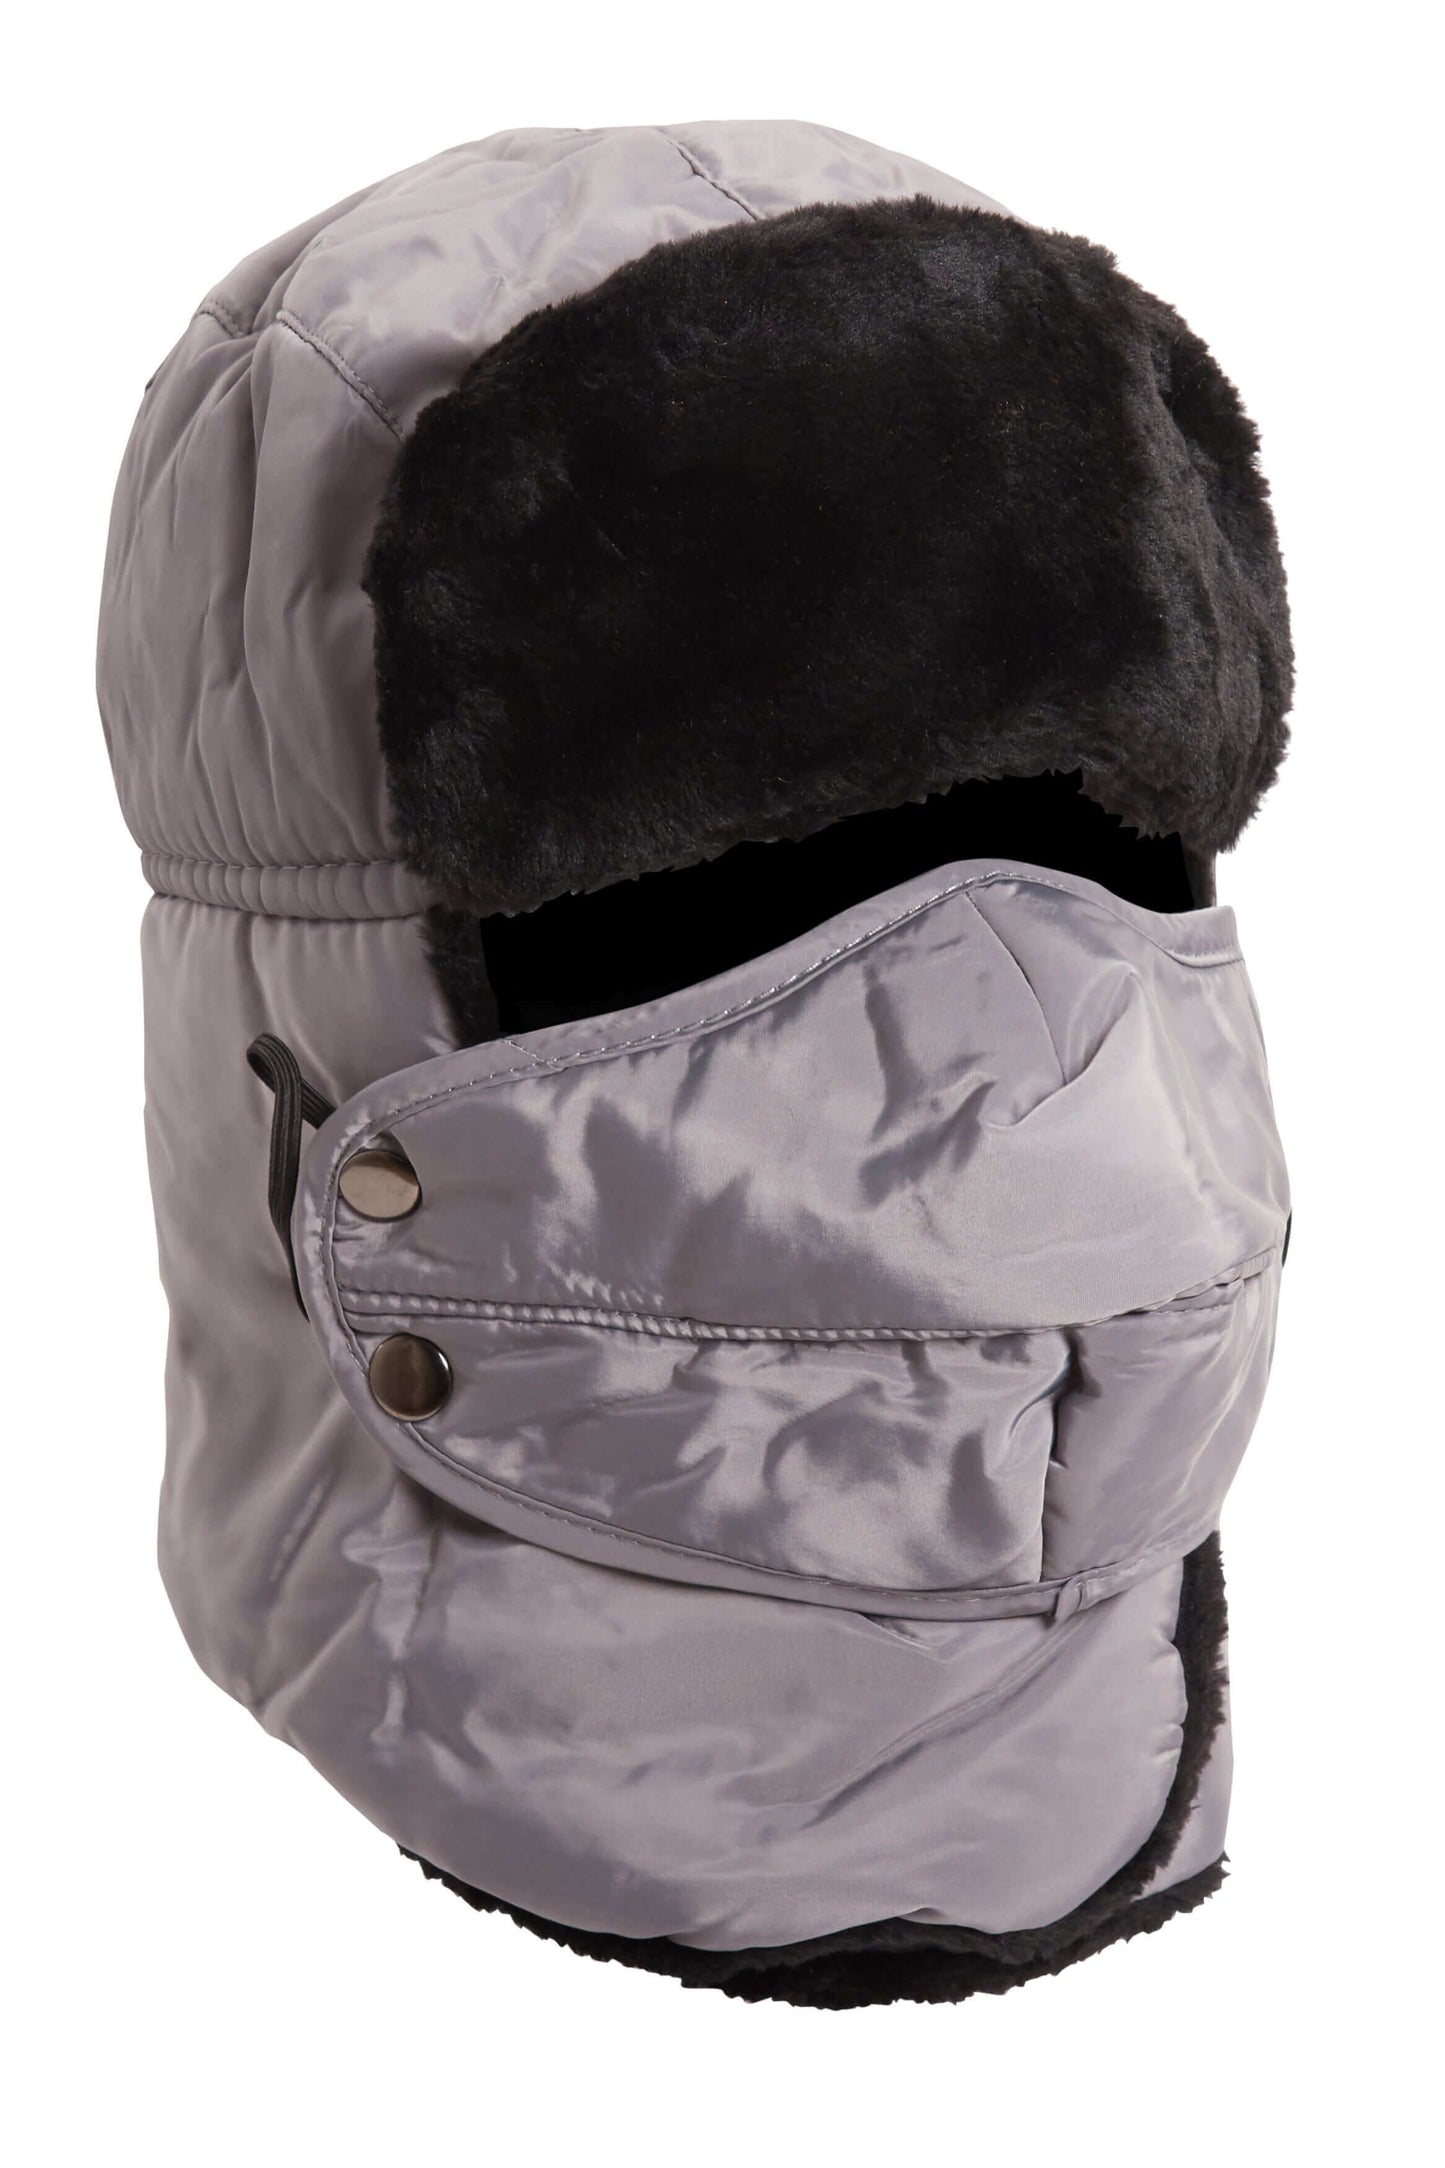 3 In 1 Trapper Hat With Mask, Removable Full Face Cover Showerproof Trooper Hat. Buy now for £10.00. A Trapper Hat by Heatwave Thermalwear. black, blue, brown, face cover, grey, hat, heatwave, mask, navy, pink, polyster, red, silver, skiing, stylish, ther